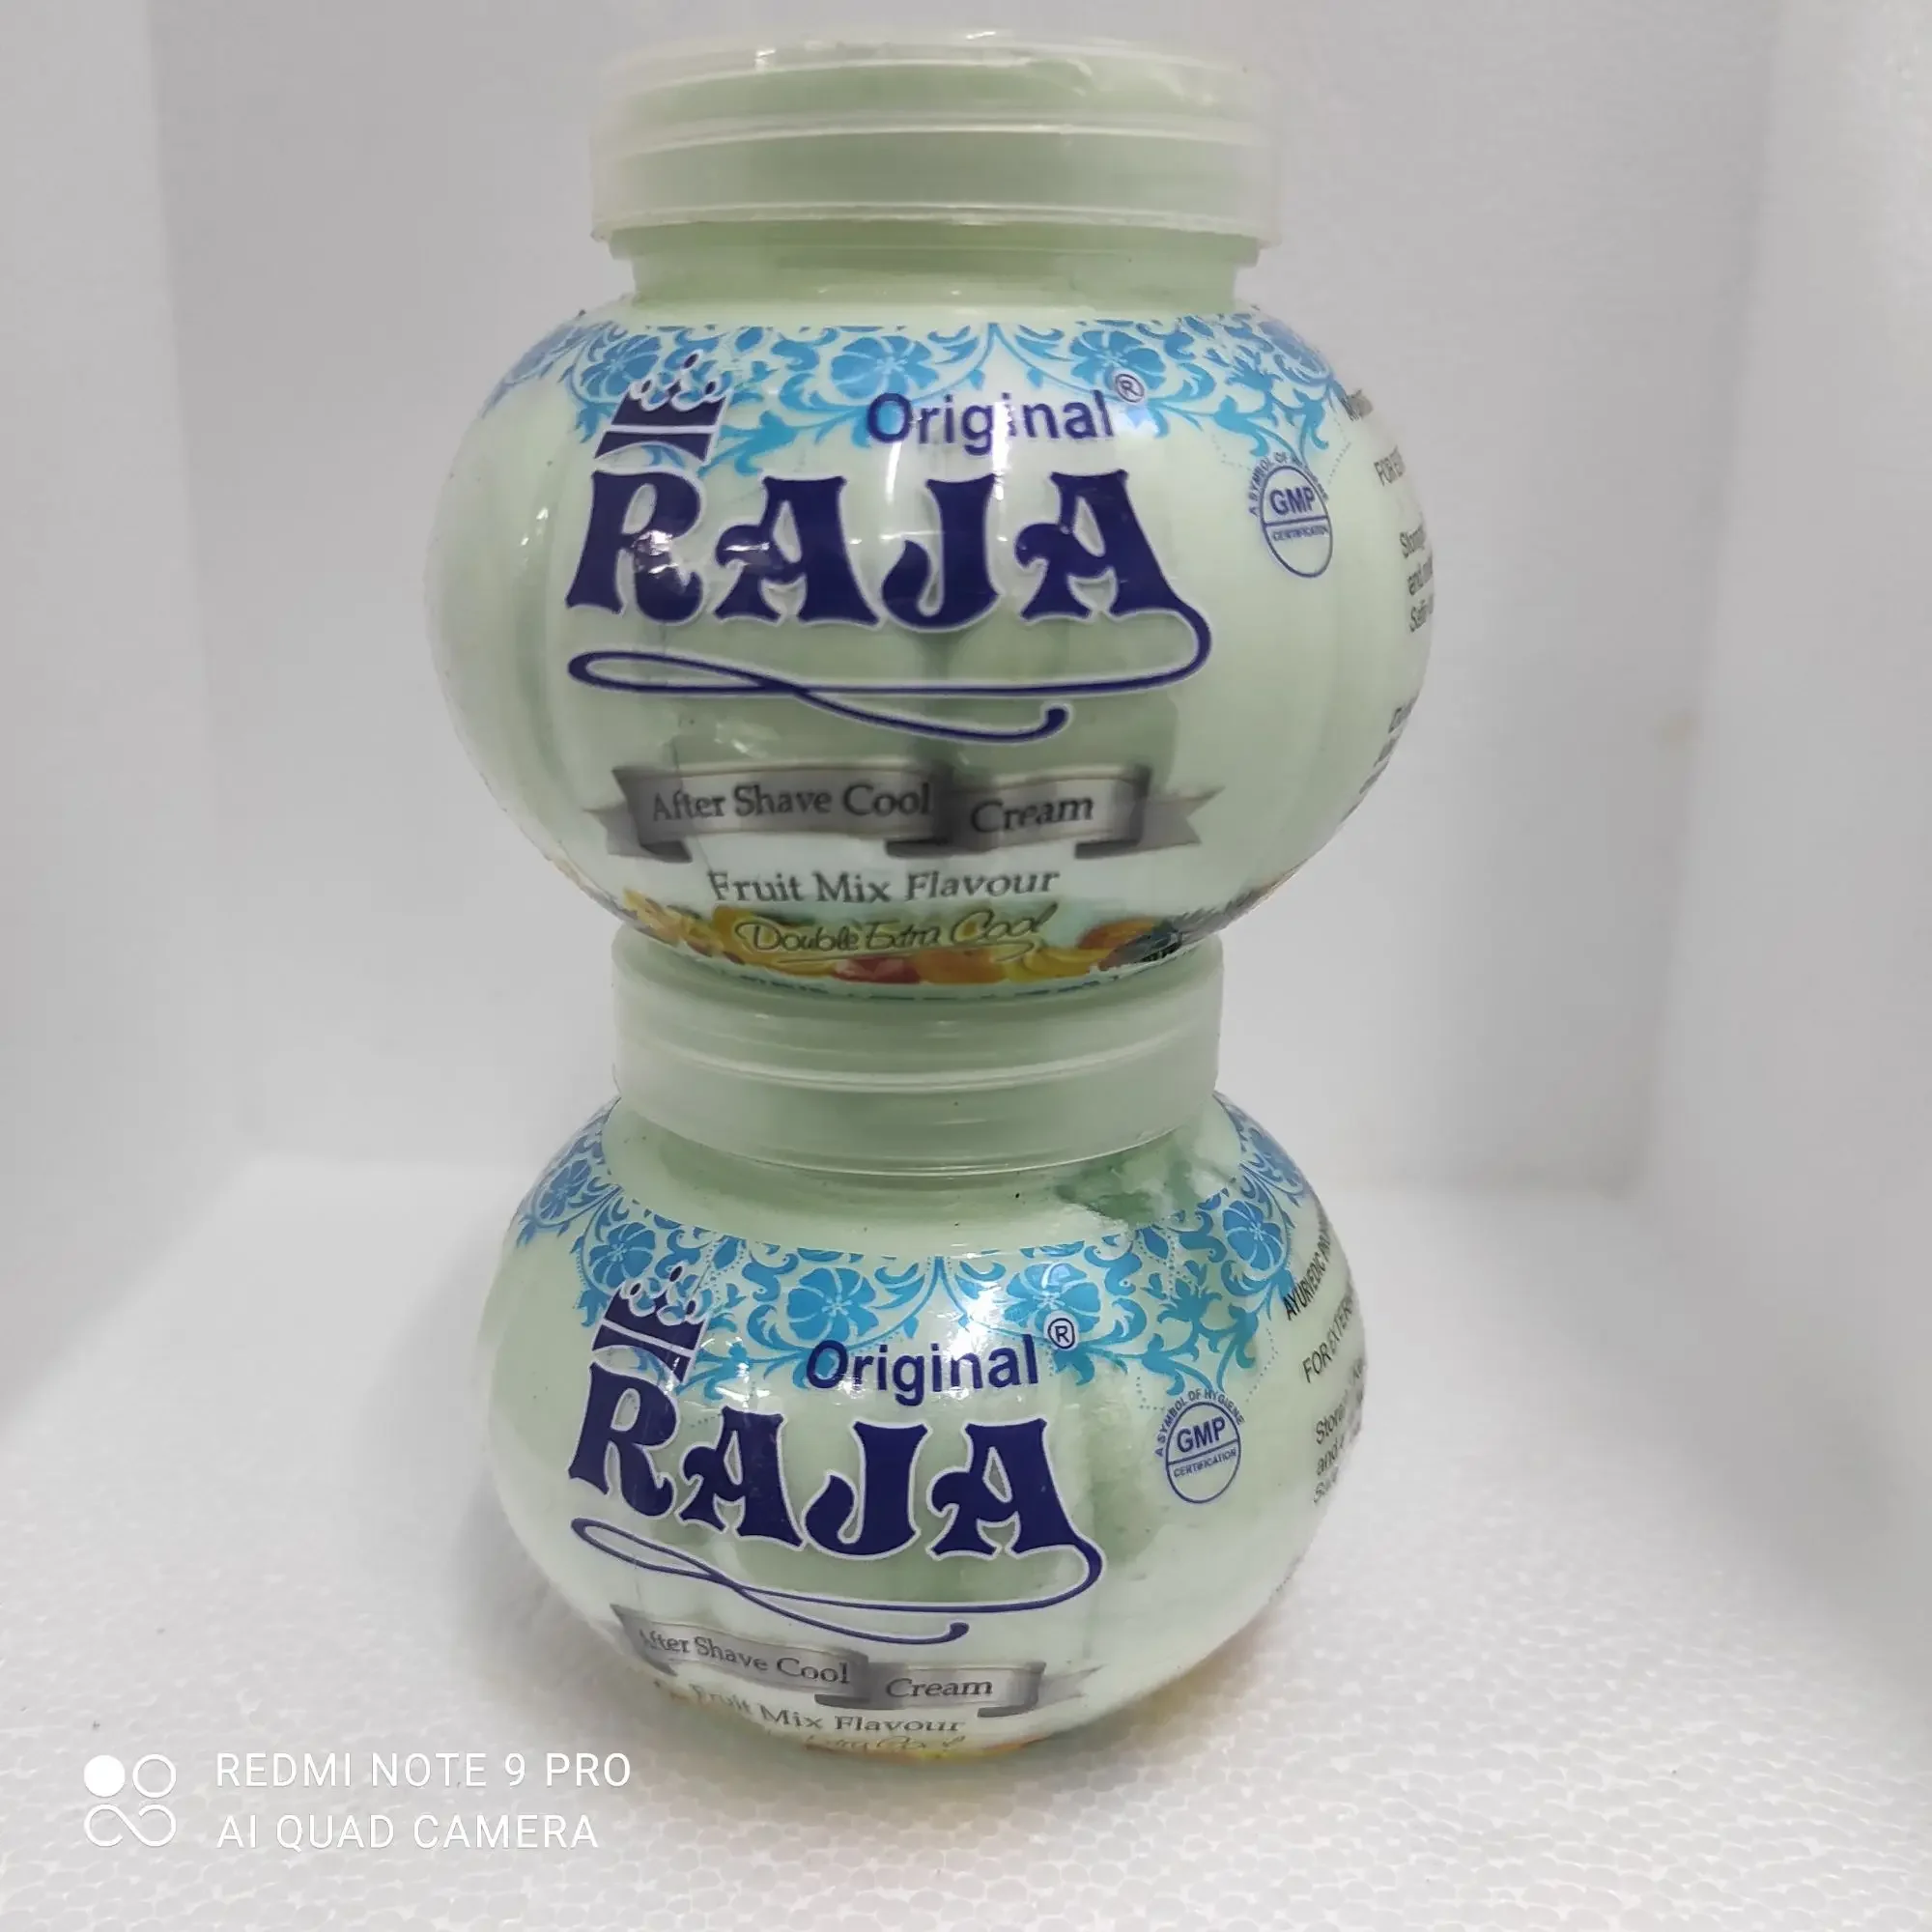 RAJA AFTER SHAVE COOL CREAM FRUIT MIX FLAVOUR 200G*2PC